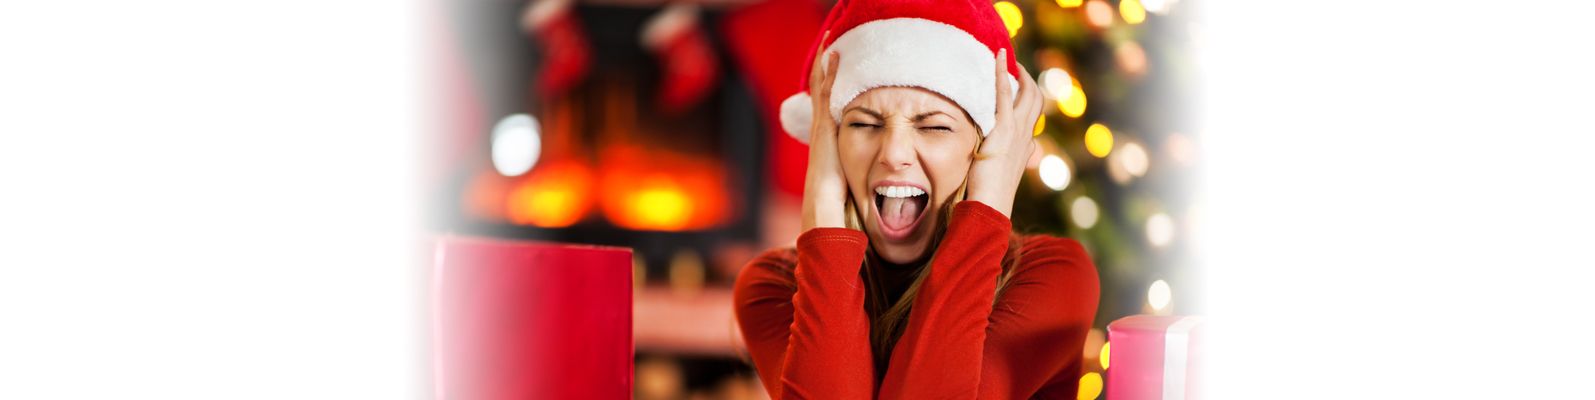 Image of woman screaming while wearing a santa hat in front of a Christmas tree.